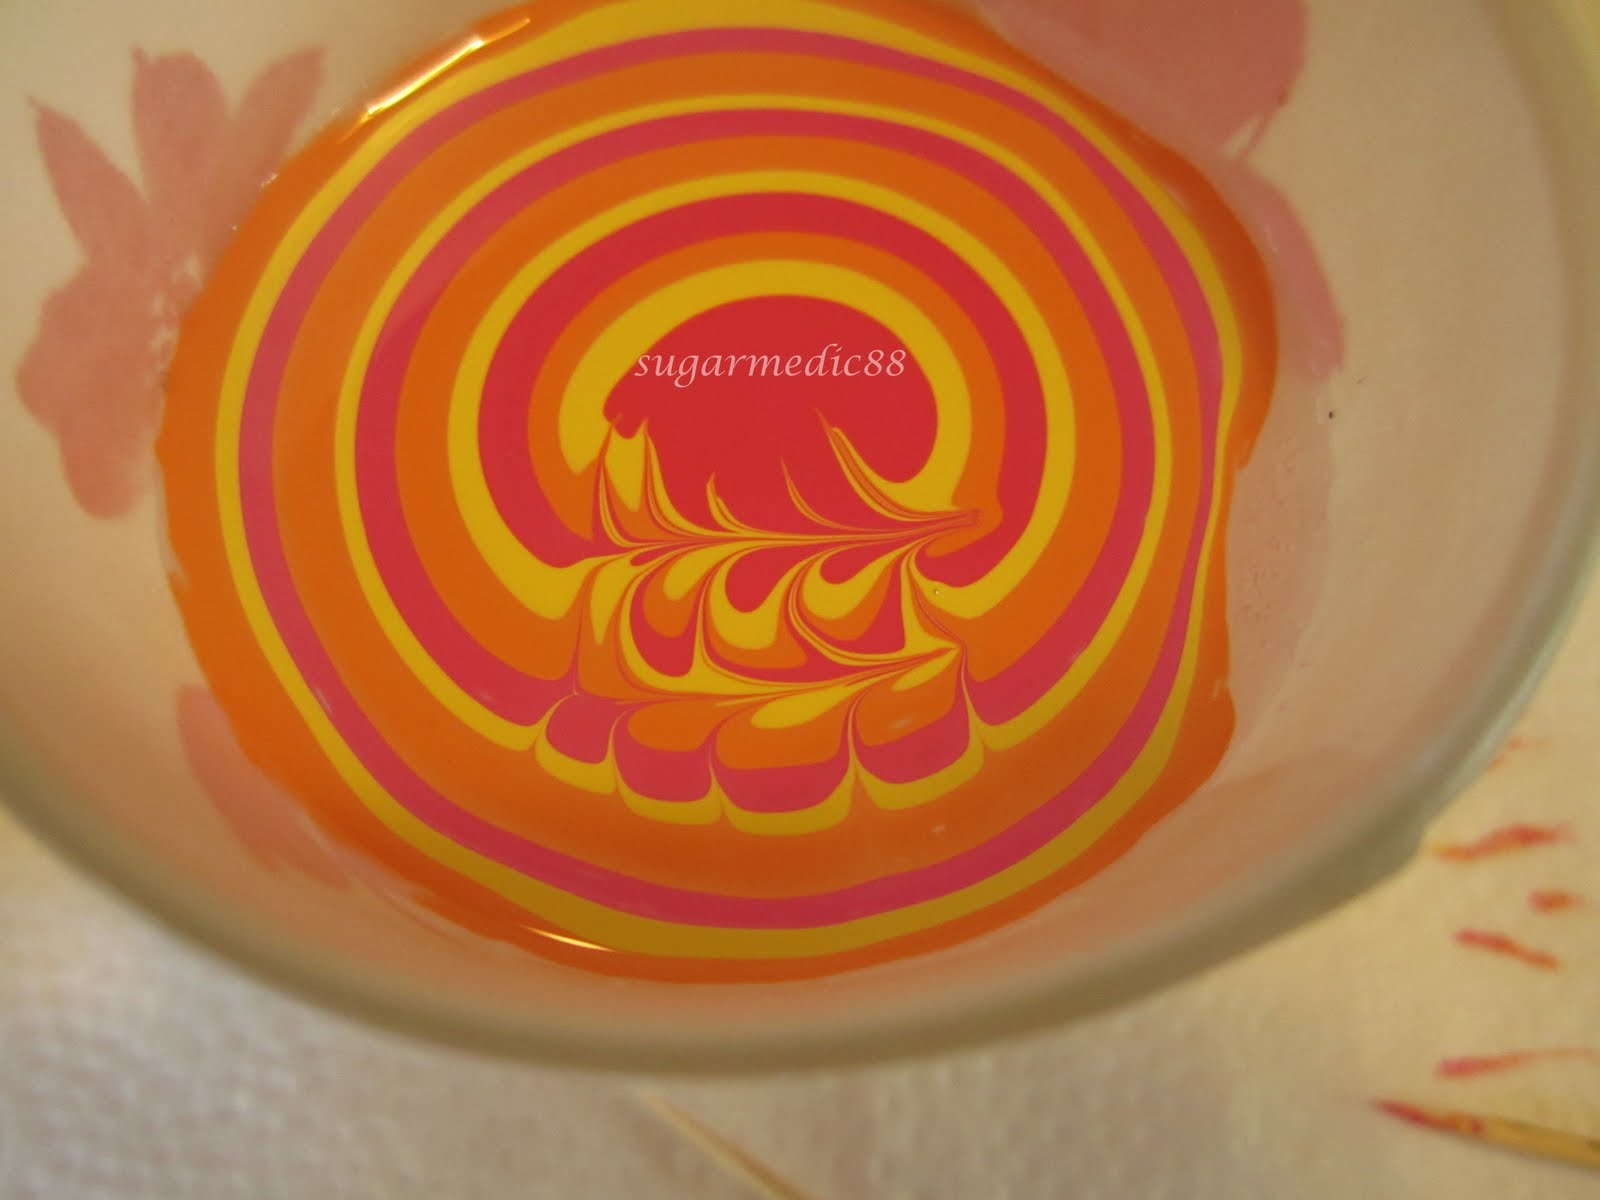 Hints and Tips for water marbling that will hopefully help you out!